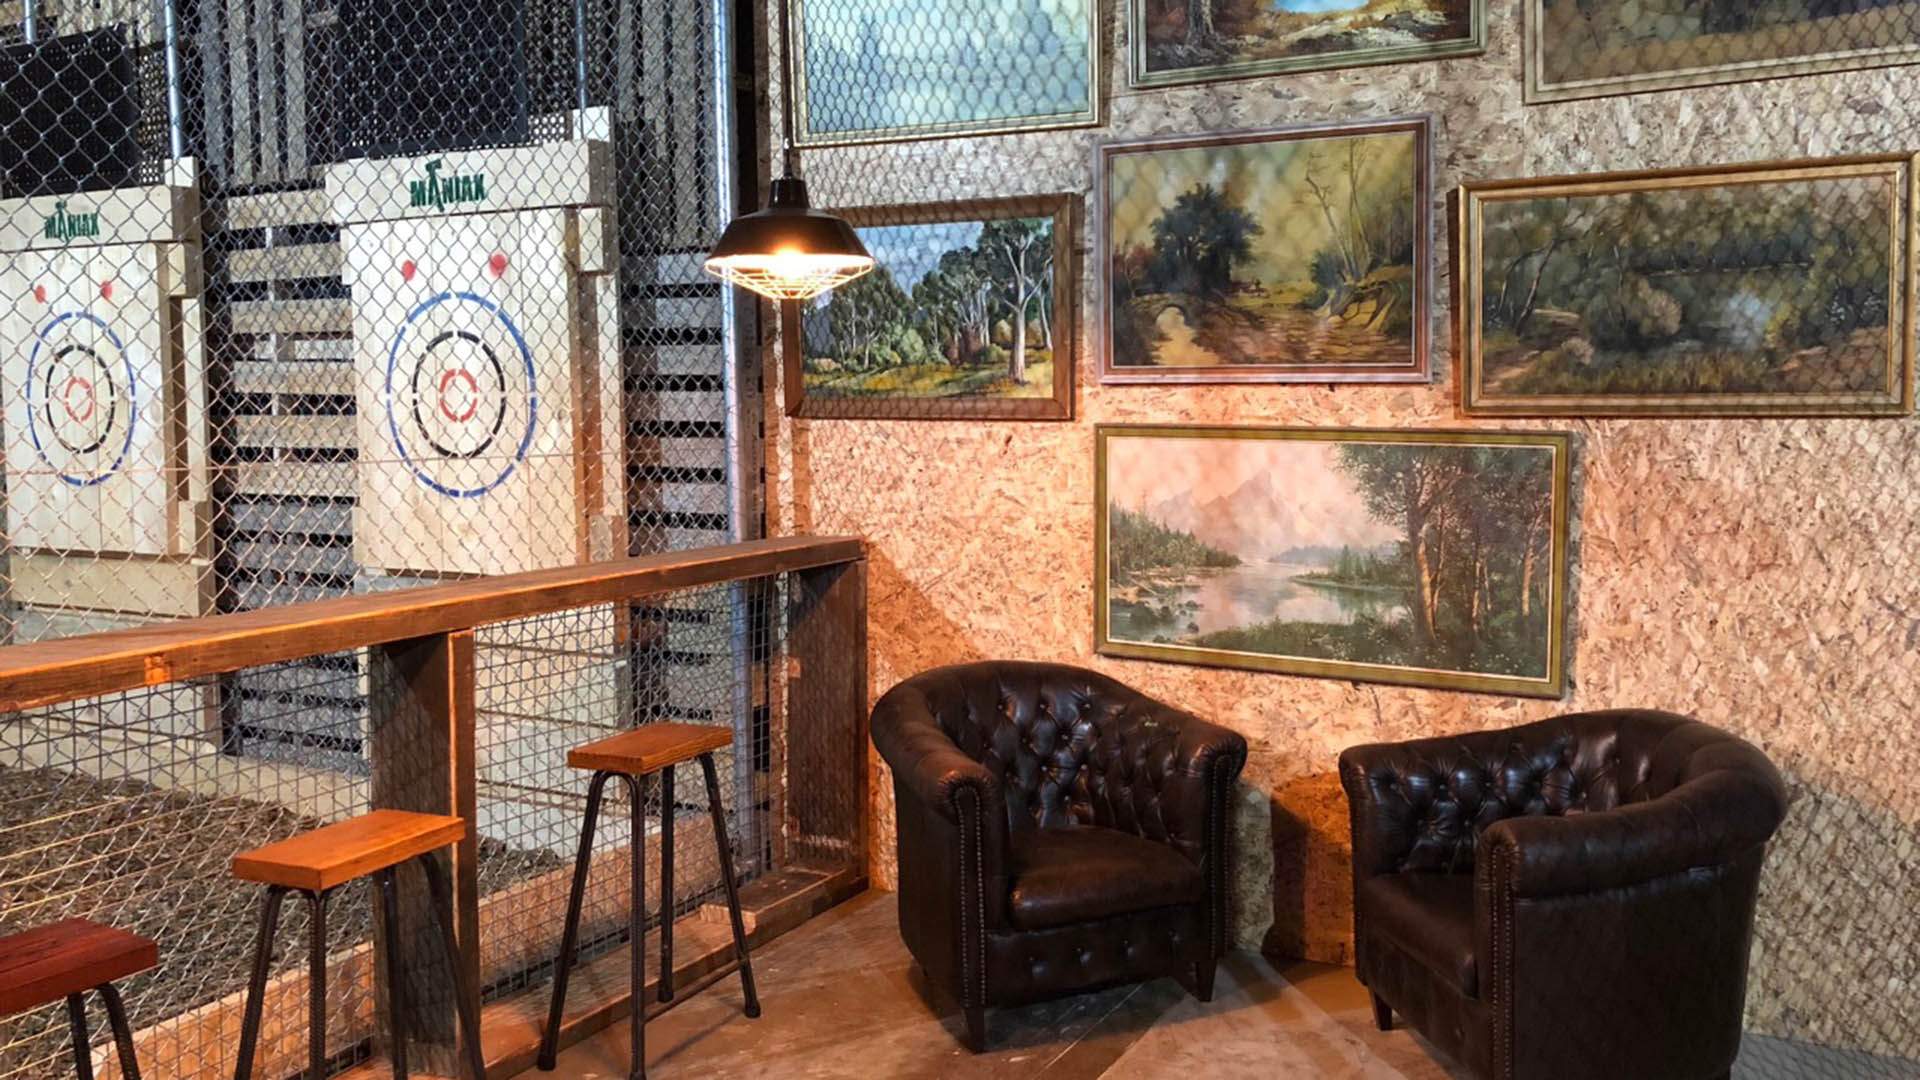 Sydney's Axe Throwing Joint Maniax Has Finally Arrived in Brisbane